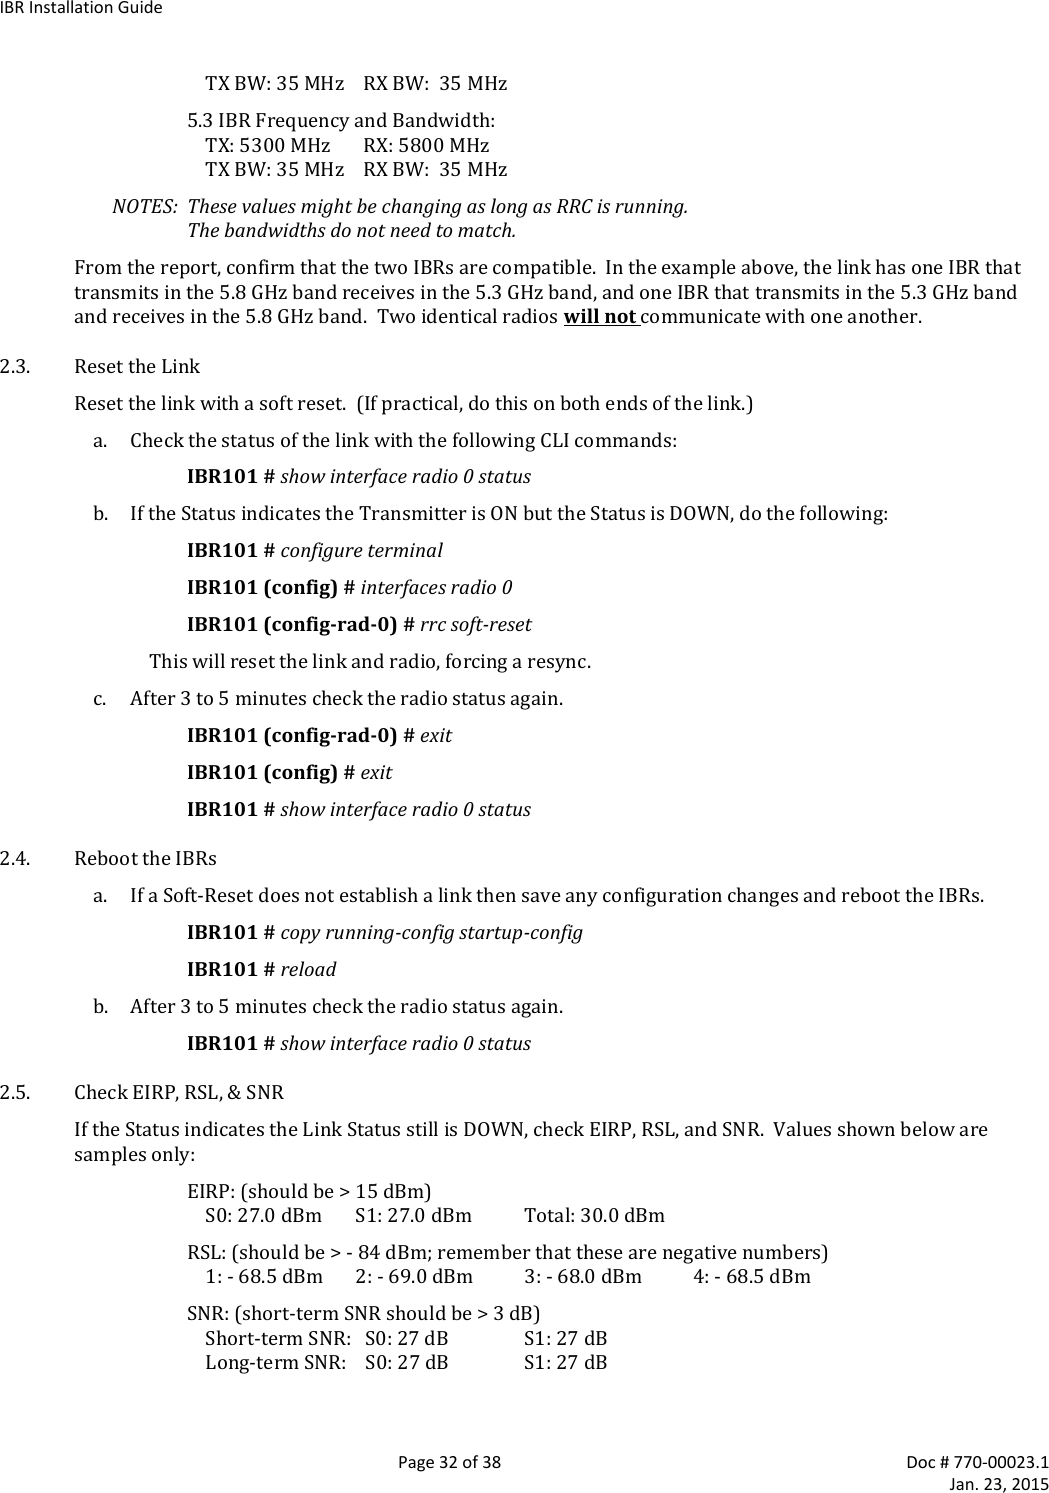 IBR Installation Guide   Page 32 of 38  Doc # 770-00023.1     Jan. 23, 2015 TX BW: 35 MHz    RX BW:  35 MHz 5.3 IBR Frequency and Bandwidth: TX: 5300 MHz       RX: 5800 MHz TX BW: 35 MHz    RX BW:  35 MHz NOTES:  These values might be changing as long as RRC is running.   The bandwidths do not need to match. From the report, confirm that the two IBRs are compatible.  In the example above, the link has one IBR that transmits in the 5.8 GHz band receives in the 5.3 GHz band, and one IBR that transmits in the 5.3 GHz band and receives in the 5.8 GHz band.  Two identical radios will not communicate with one another. 2.3. Reset the Link Reset the link with a soft reset.  (If practical, do this on both ends of the link.) a. Check the status of the link with the following CLI commands: IBR101 # show interface radio 0 status b. If the Status indicates the Transmitter is ON but the Status is DOWN, do the following: IBR101 # configure terminal IBR101 (config) # interfaces radio 0 IBR101 (config-rad-0) # rrc soft-reset This will reset the link and radio, forcing a resync.  c. After 3 to 5 minutes check the radio status again. IBR101 (config-rad-0) # exit IBR101 (config) # exit IBR101 # show interface radio 0 status 2.4. Reboot the IBRs a. If a Soft-Reset does not establish a link then save any configuration changes and reboot the IBRs. IBR101 # copy running-config startup-config IBR101 # reload b. After 3 to 5 minutes check the radio status again. IBR101 # show interface radio 0 status 2.5. Check EIRP, RSL, &amp; SNR If the Status indicates the Link Status still is DOWN, check EIRP, RSL, and SNR.  Values shown below are samples only: EIRP: (should be &gt; 15 dBm) S0: 27.0 dBm   S1: 27.0 dBm   Total: 30.0 dBm RSL: (should be &gt; - 84 dBm; remember that these are negative numbers) 1: - 68.5 dBm  2: - 69.0 dBm  3: - 68.0 dBm  4: - 68.5 dBm SNR: (short-term SNR should be &gt; 3 dB) Short-term SNR:   S0: 27 dB  S1: 27 dB Long-term SNR:    S0: 27 dB  S1: 27 dB 